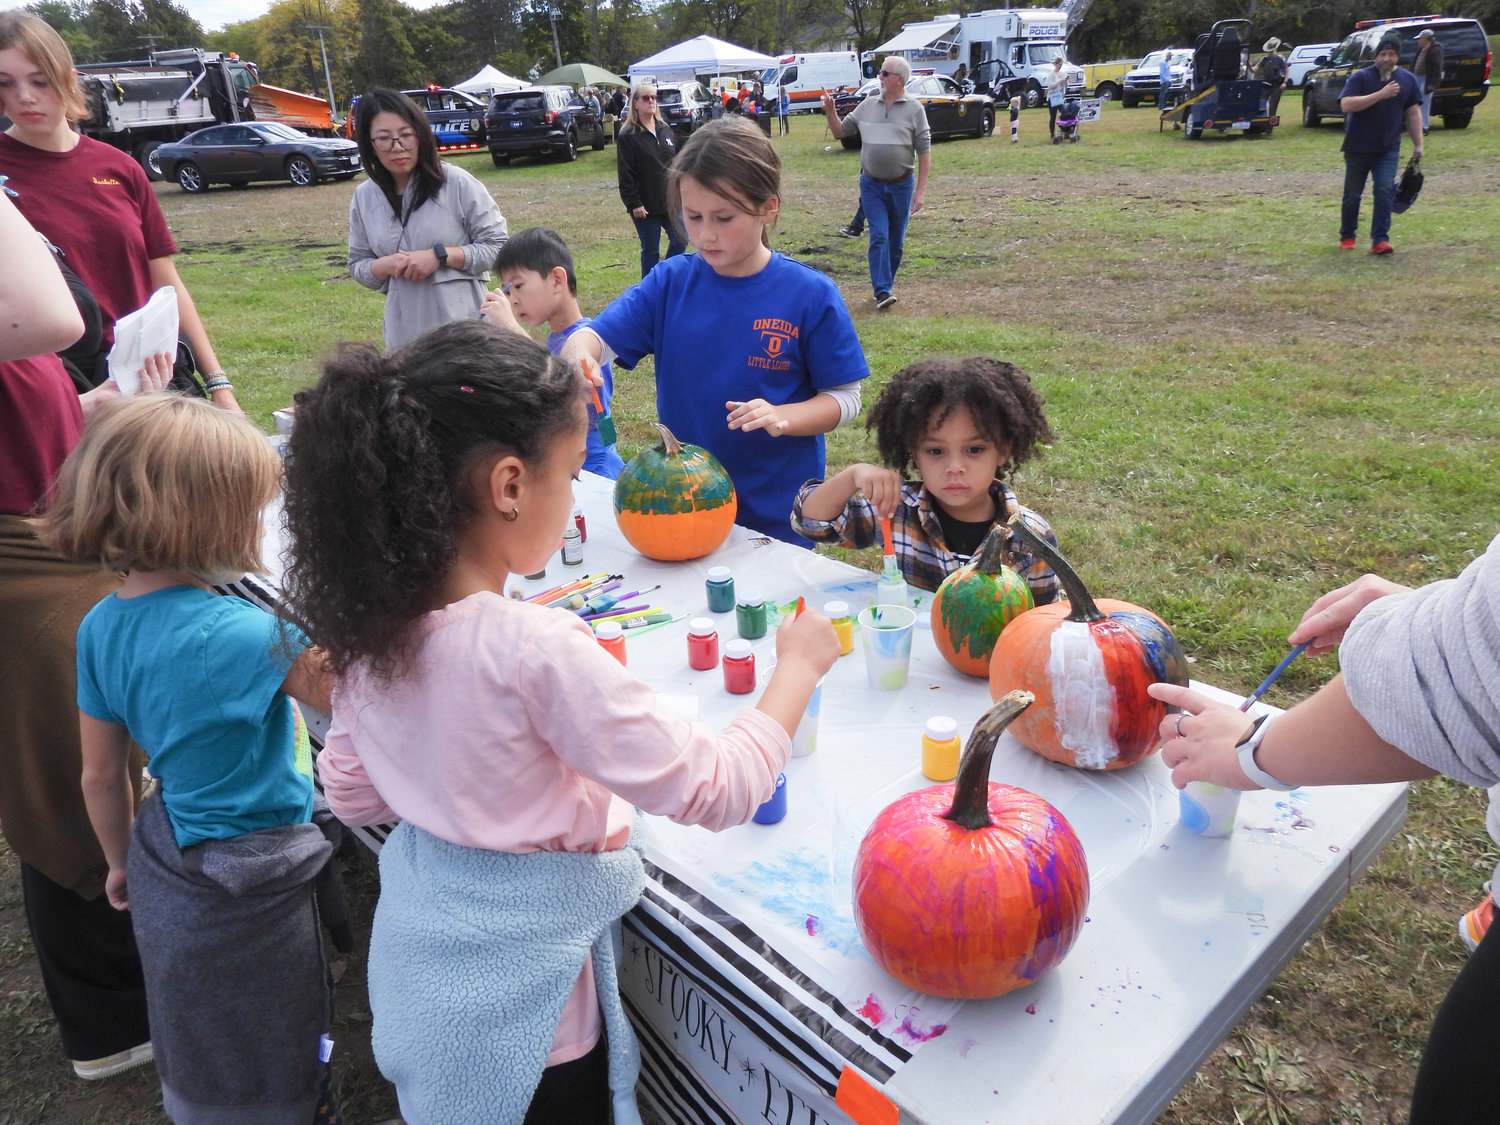 Children attending the second annual Oneida Fall Fest paint pumpkins, free of charge to take home.